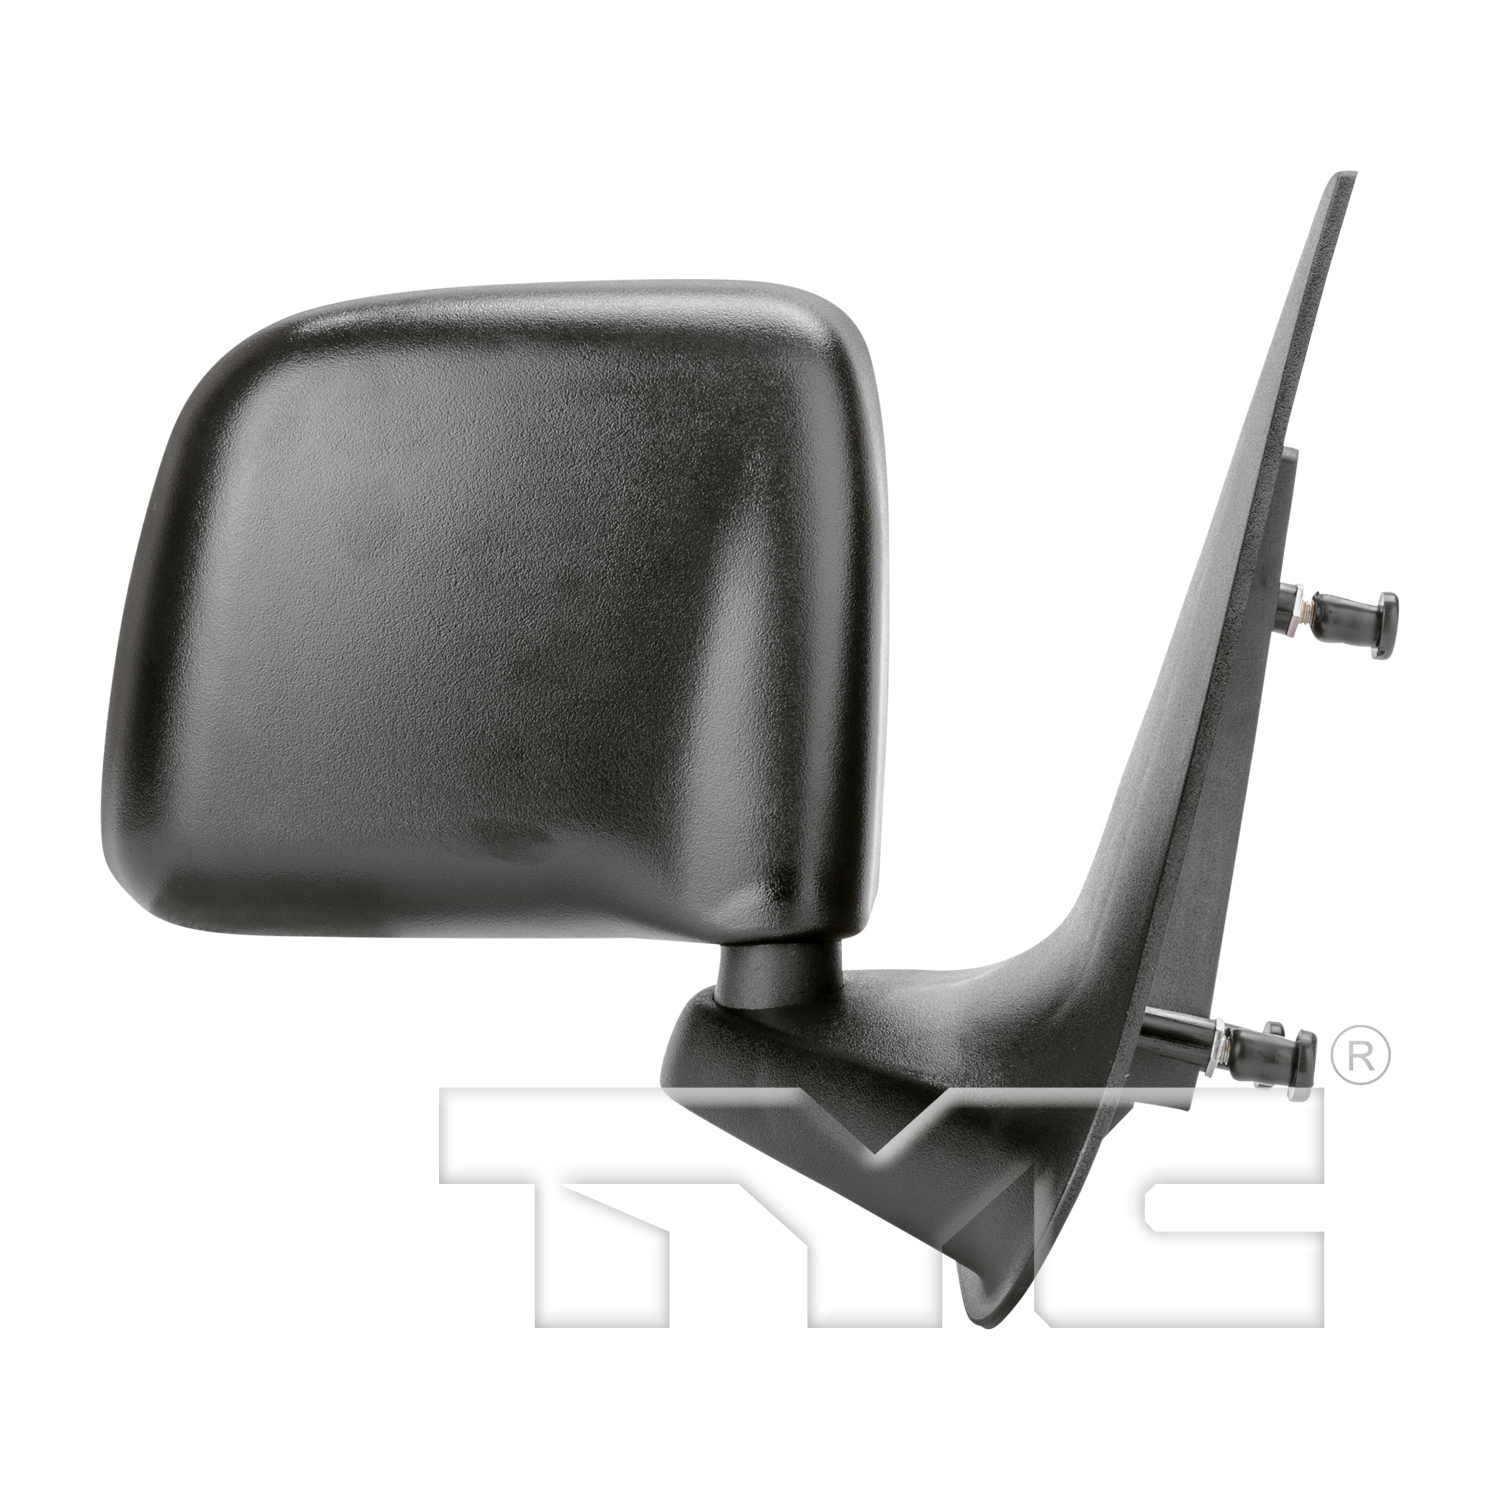 Aftermarket MIRRORS for MAZDA - B4000, B4000,94-98,RT Mirror outside rear view